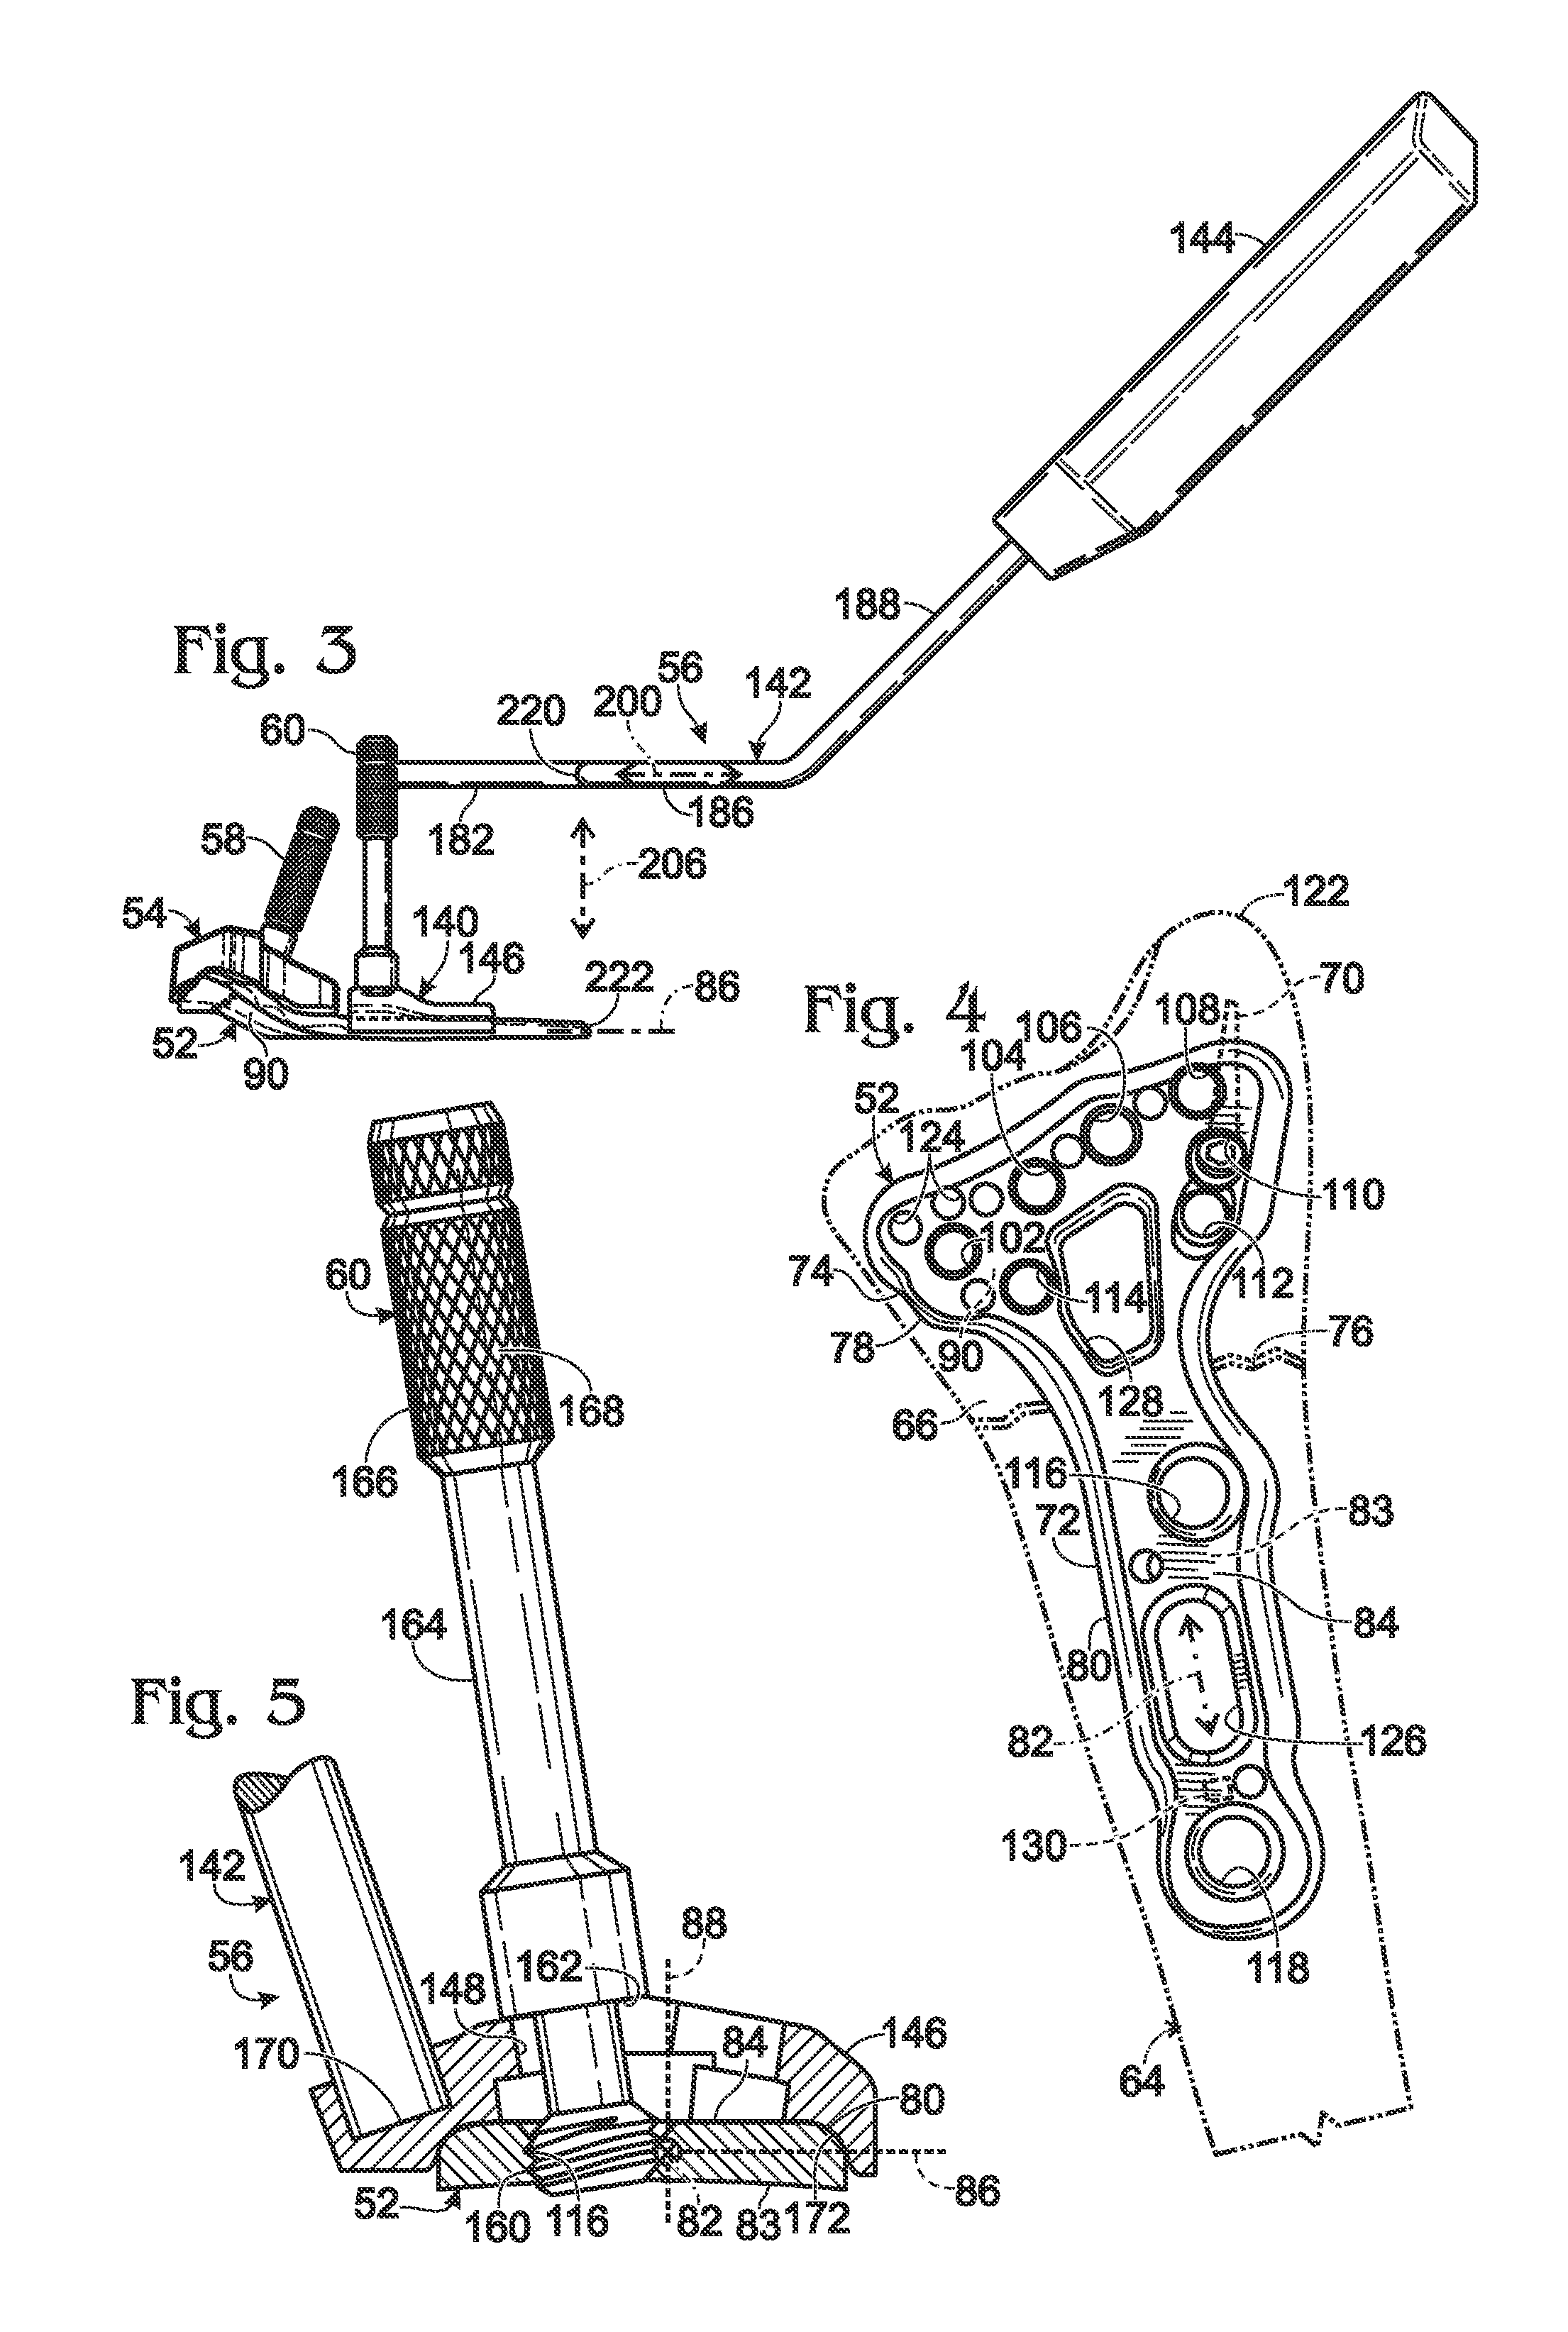 Handle assembly having a radiopaque region to facilitate positioning a bone plate on bone